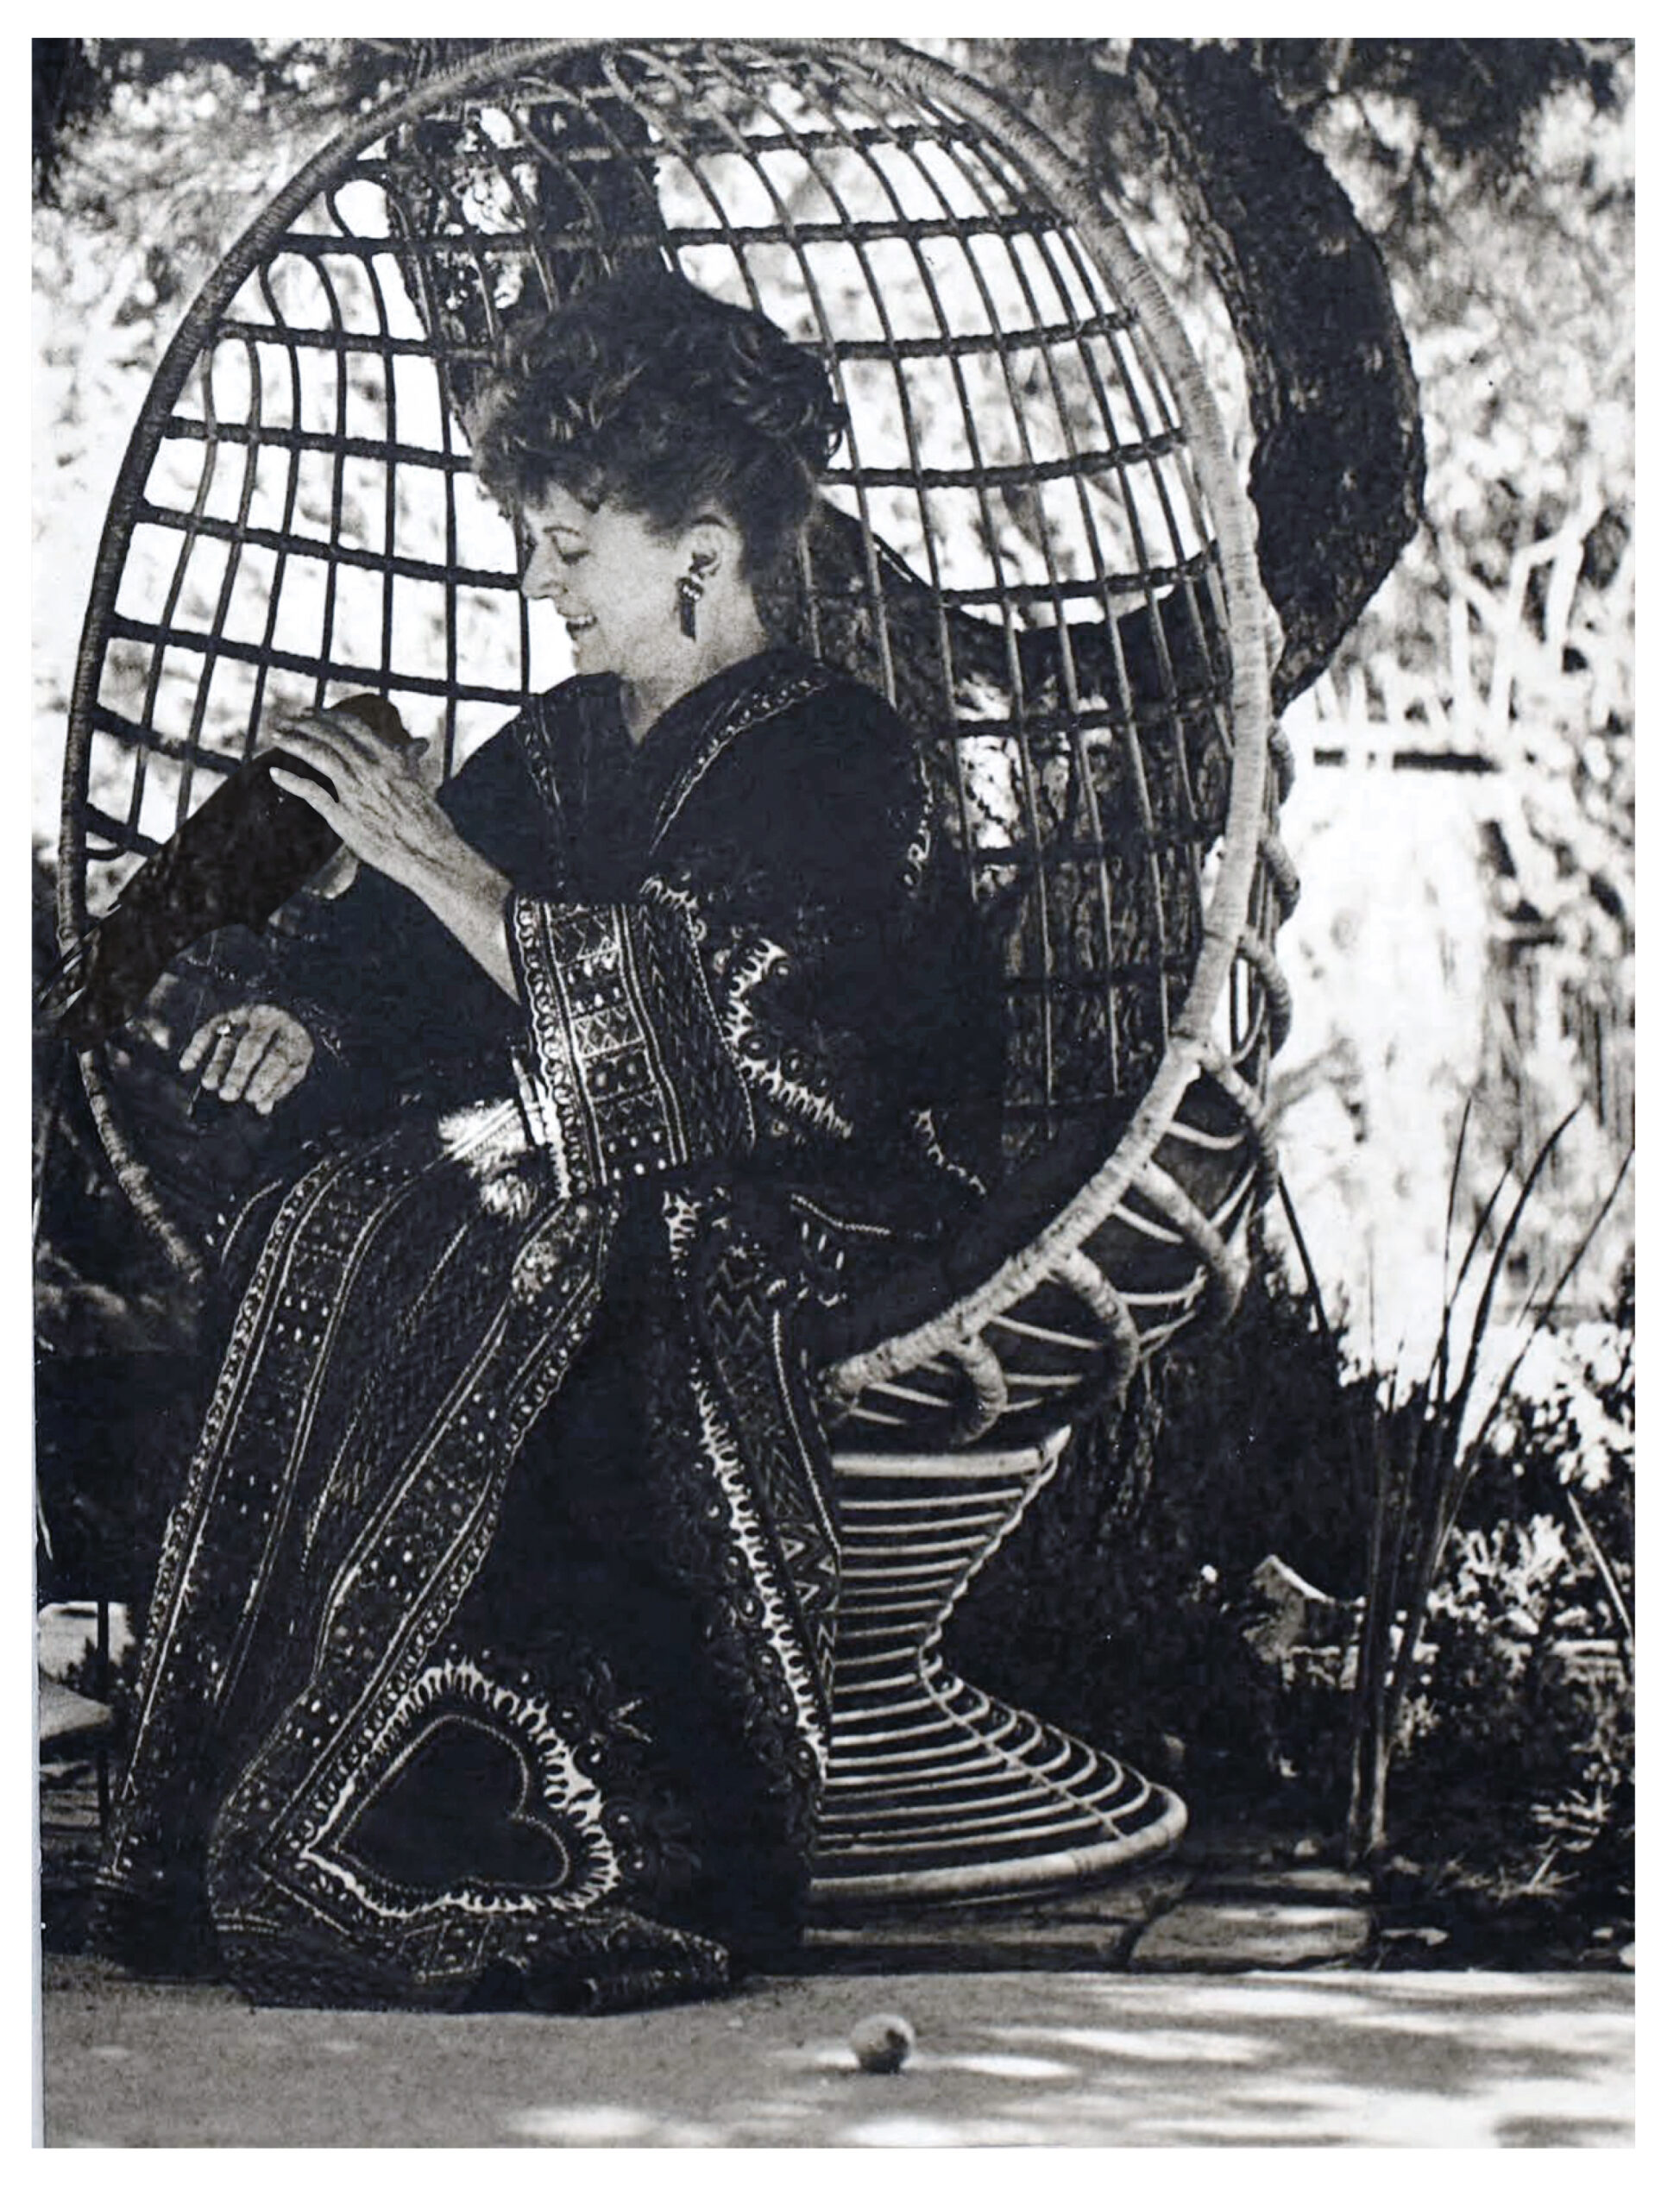 In a black and white archival image, Mia Slavenska, here in her 50s, sits in an egg-shaped, woven chair outside. Perched on her wrist is a black crow, who she gently pets with her free hand as she smiles down at it. She wears a thick robe or dress with geometric patterns; her curly hair is piled atop her head.